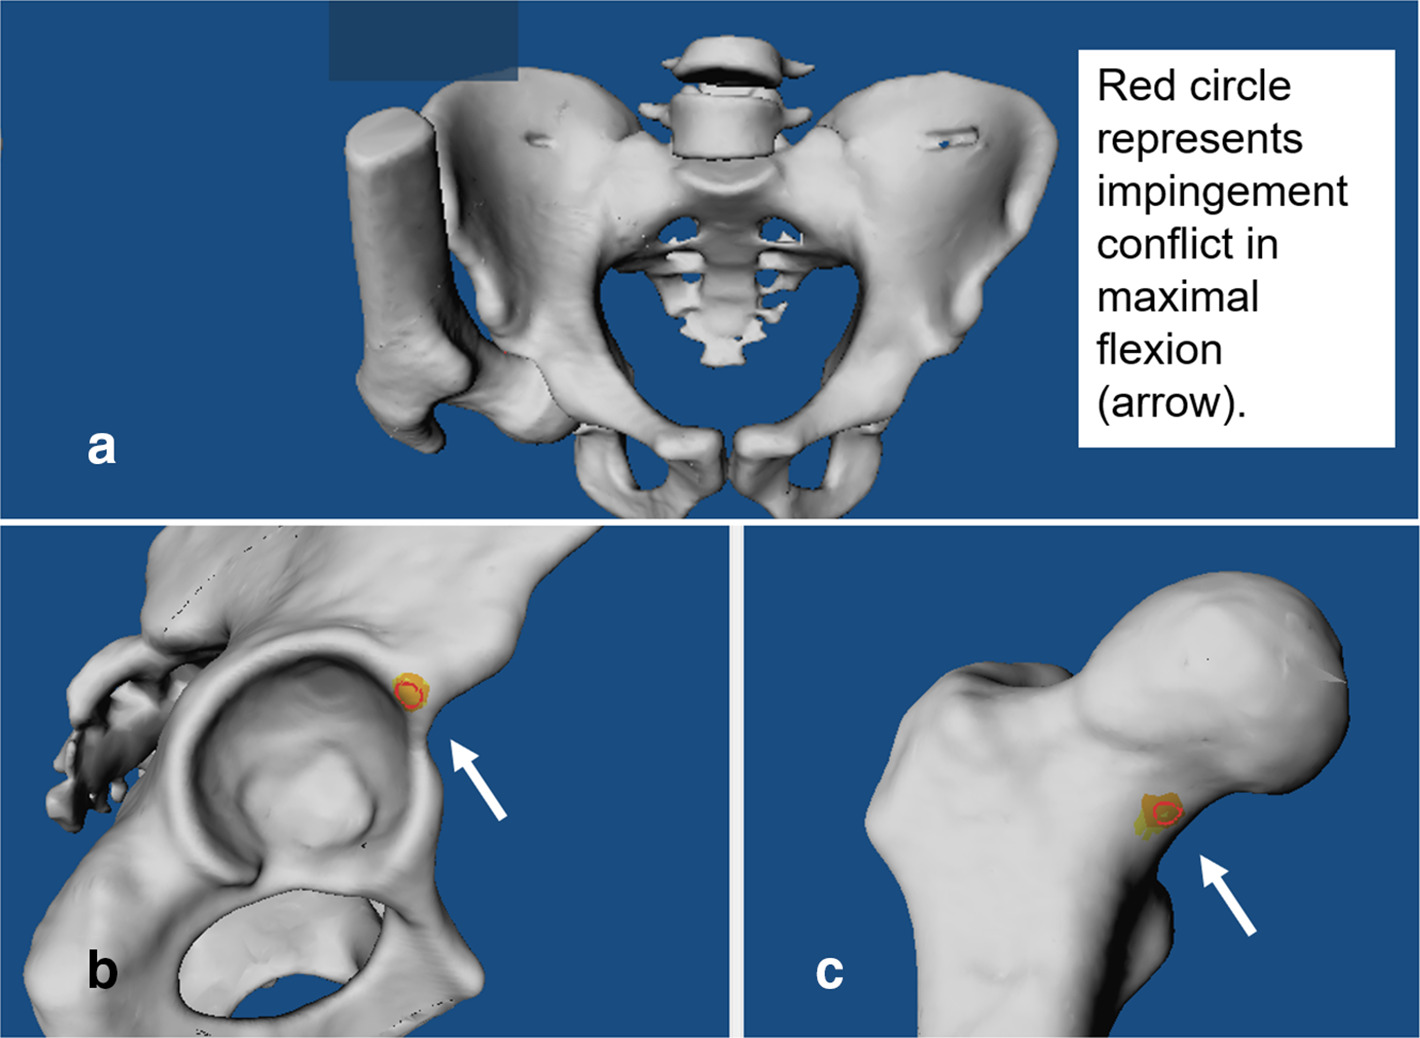 Fig. 1 
            a) CT-based 3D model of the pelvis and proximal femur is shown of a patient with cam-type femoroacetabular impingement. Impingement simulation in maximal flexion shows b) acetabular and c) femoral intra-articular impingement conflict (red circle, arrow).
          